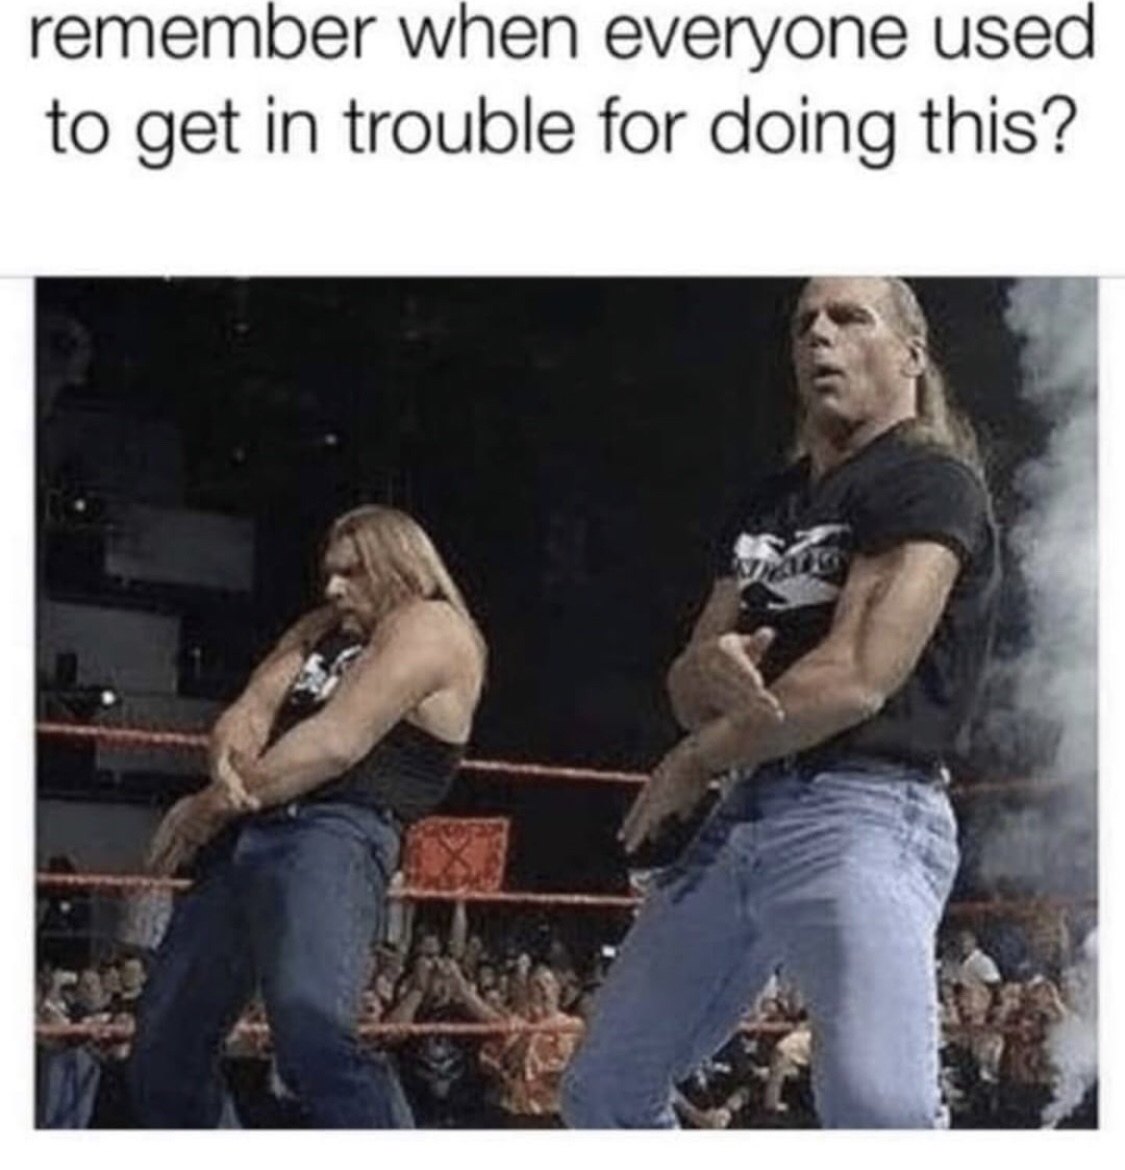 d generation x suck - remember when everyone used to get in trouble for doing this?